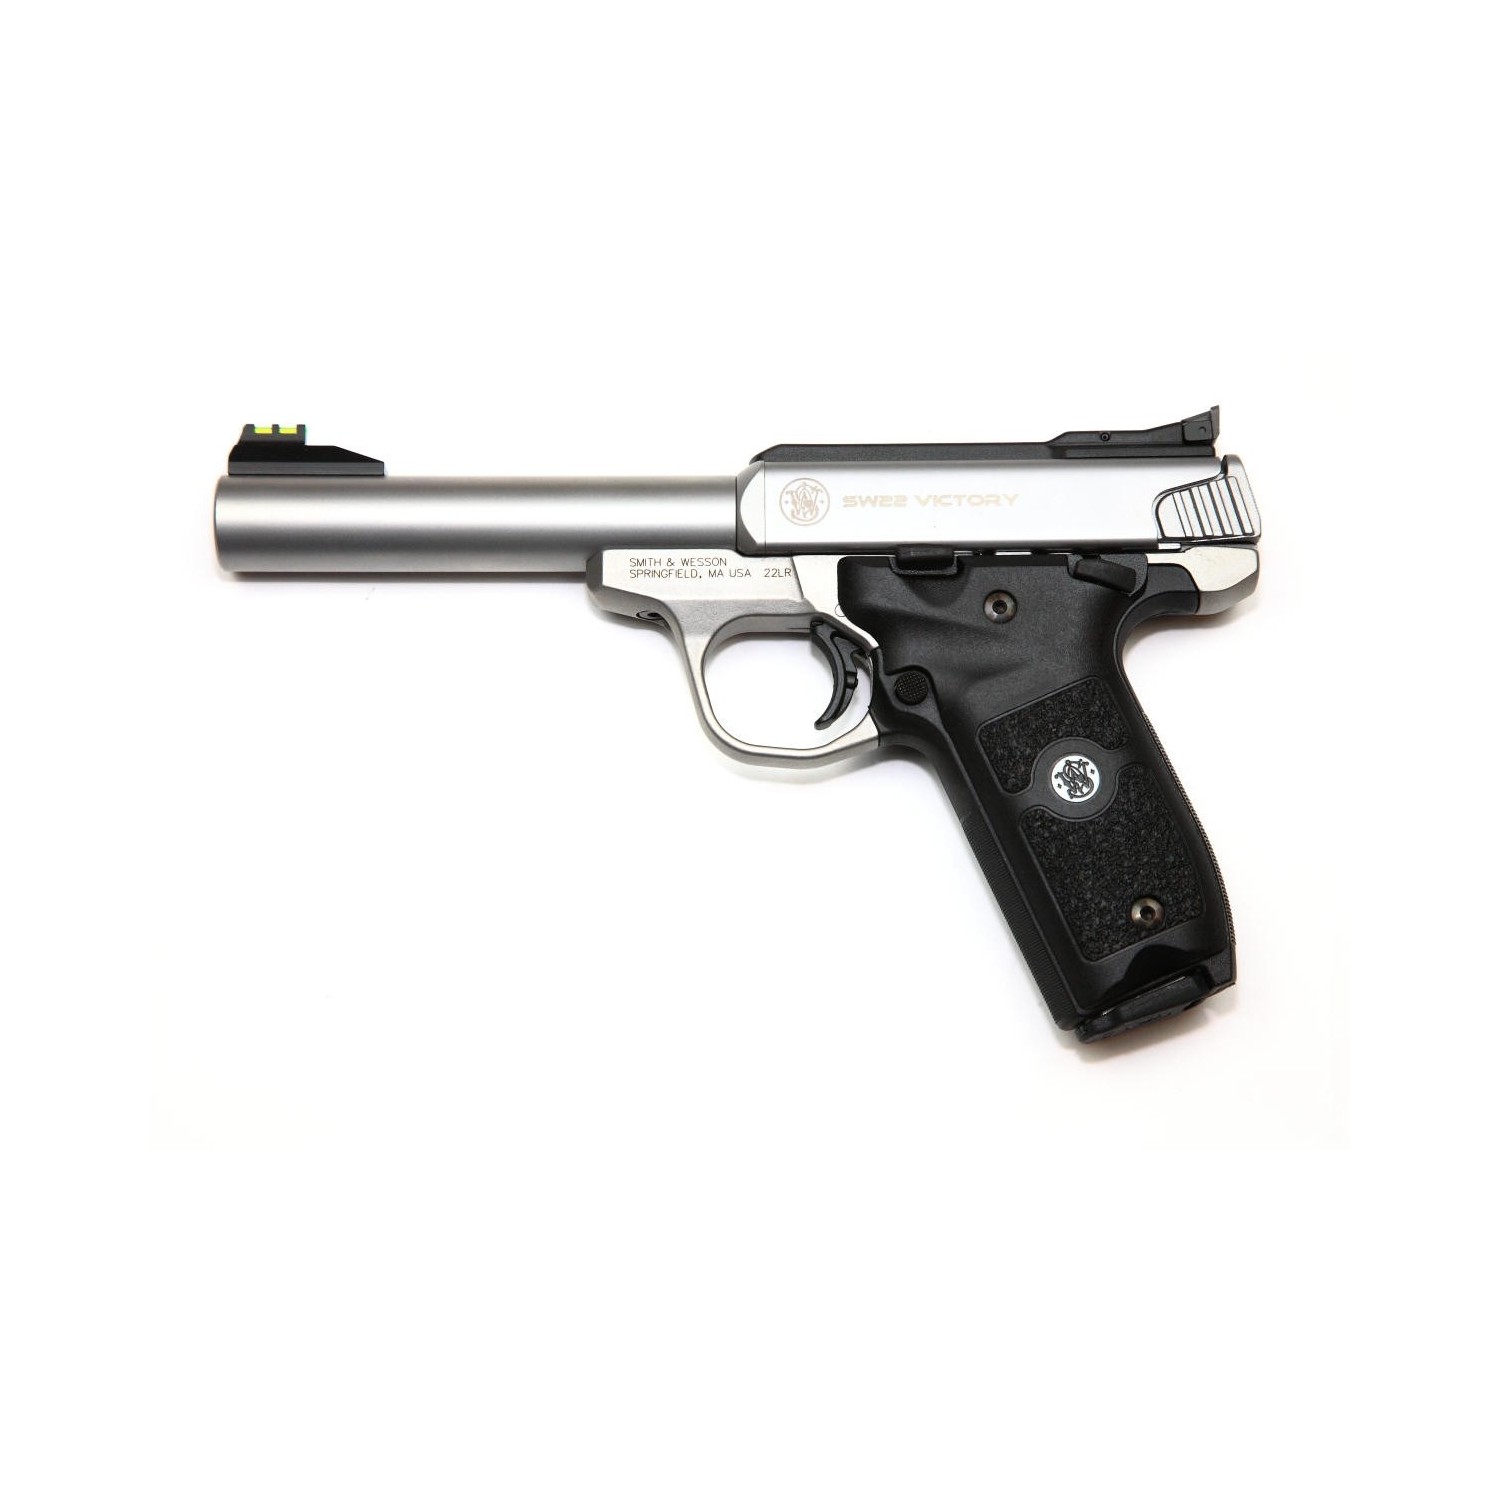 Smith & Wesson SW22 VICTORY, .22lfb